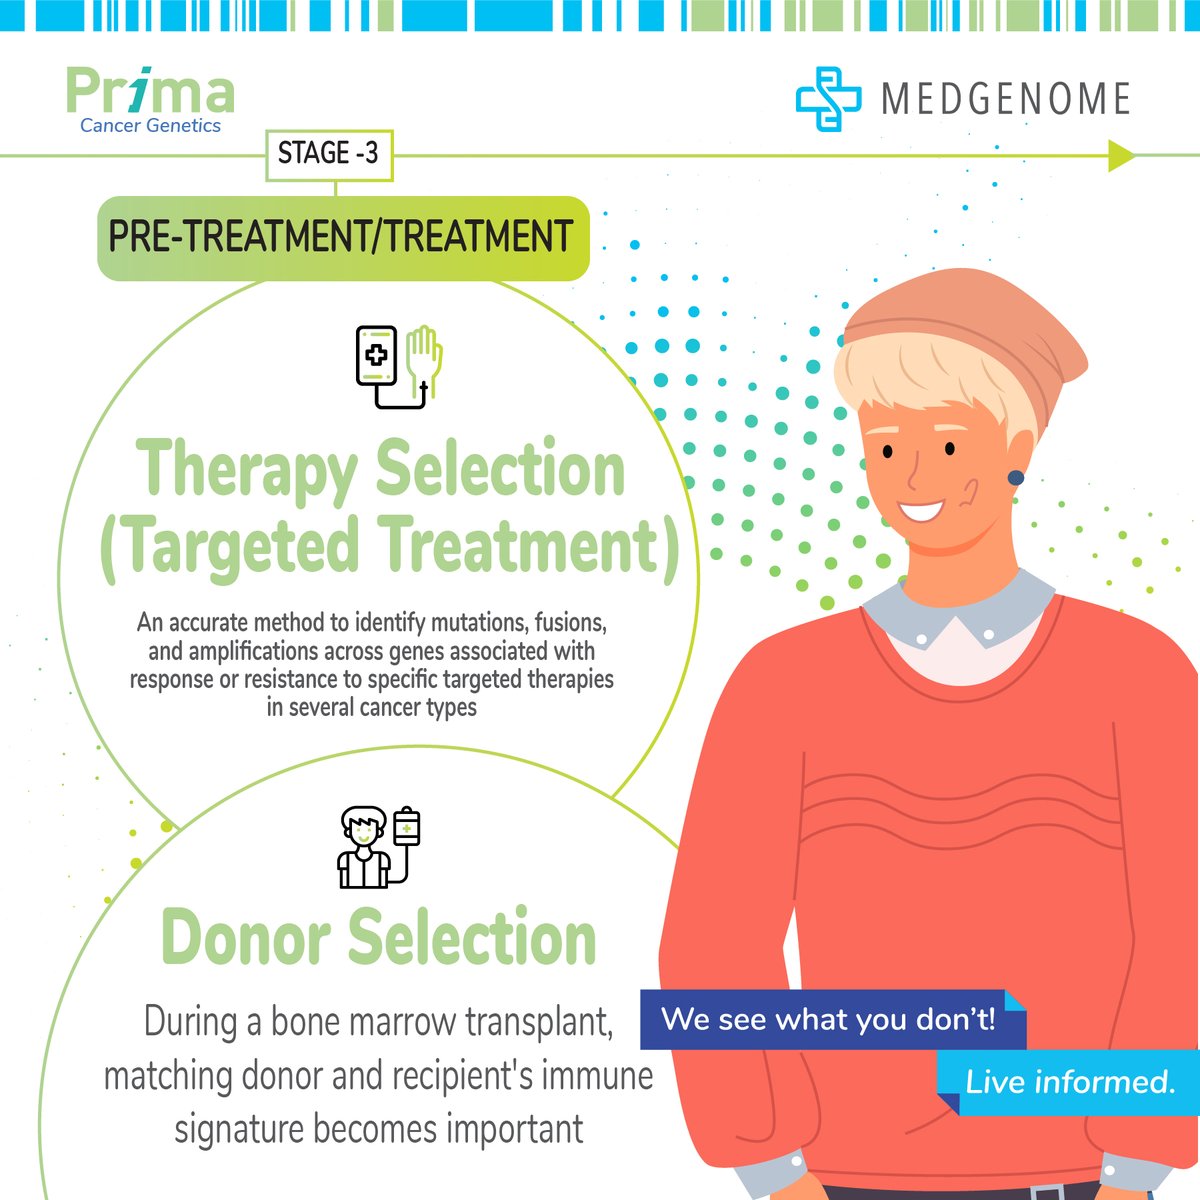 This #WorldCancerDay , let us delve into the applications of molecular testing in cancer. Know more: bit.ly/3jdCI8d
#CancerGenetics #TargetedTreatment #Genomics #PrecisionMedicine #MedGenomePrima